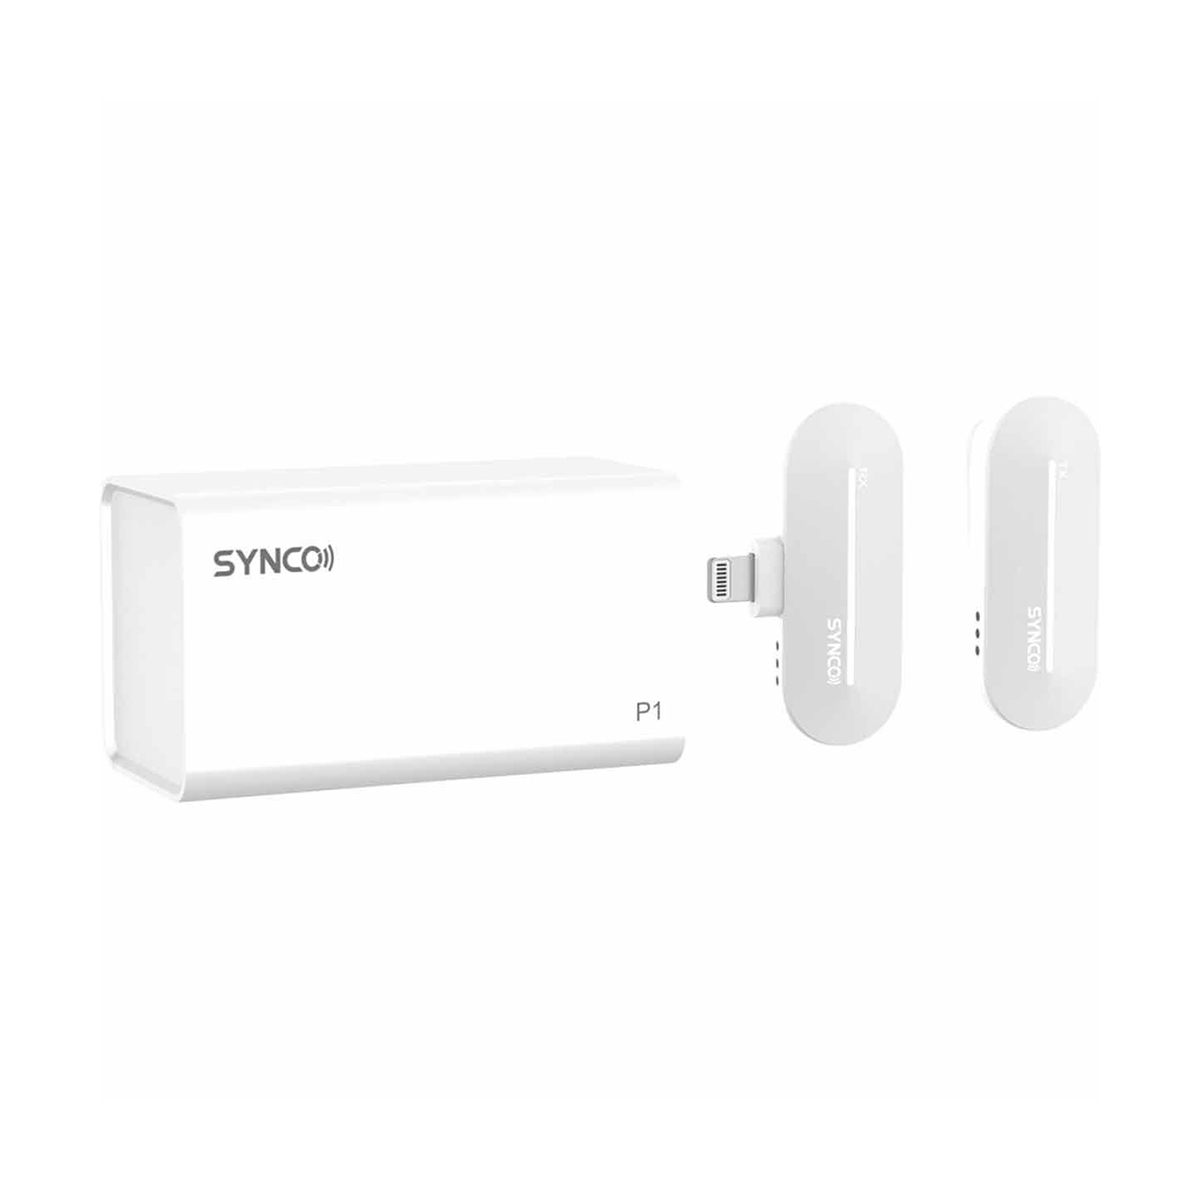 Why and how to use external phone microphone for podcast? – SYNCO